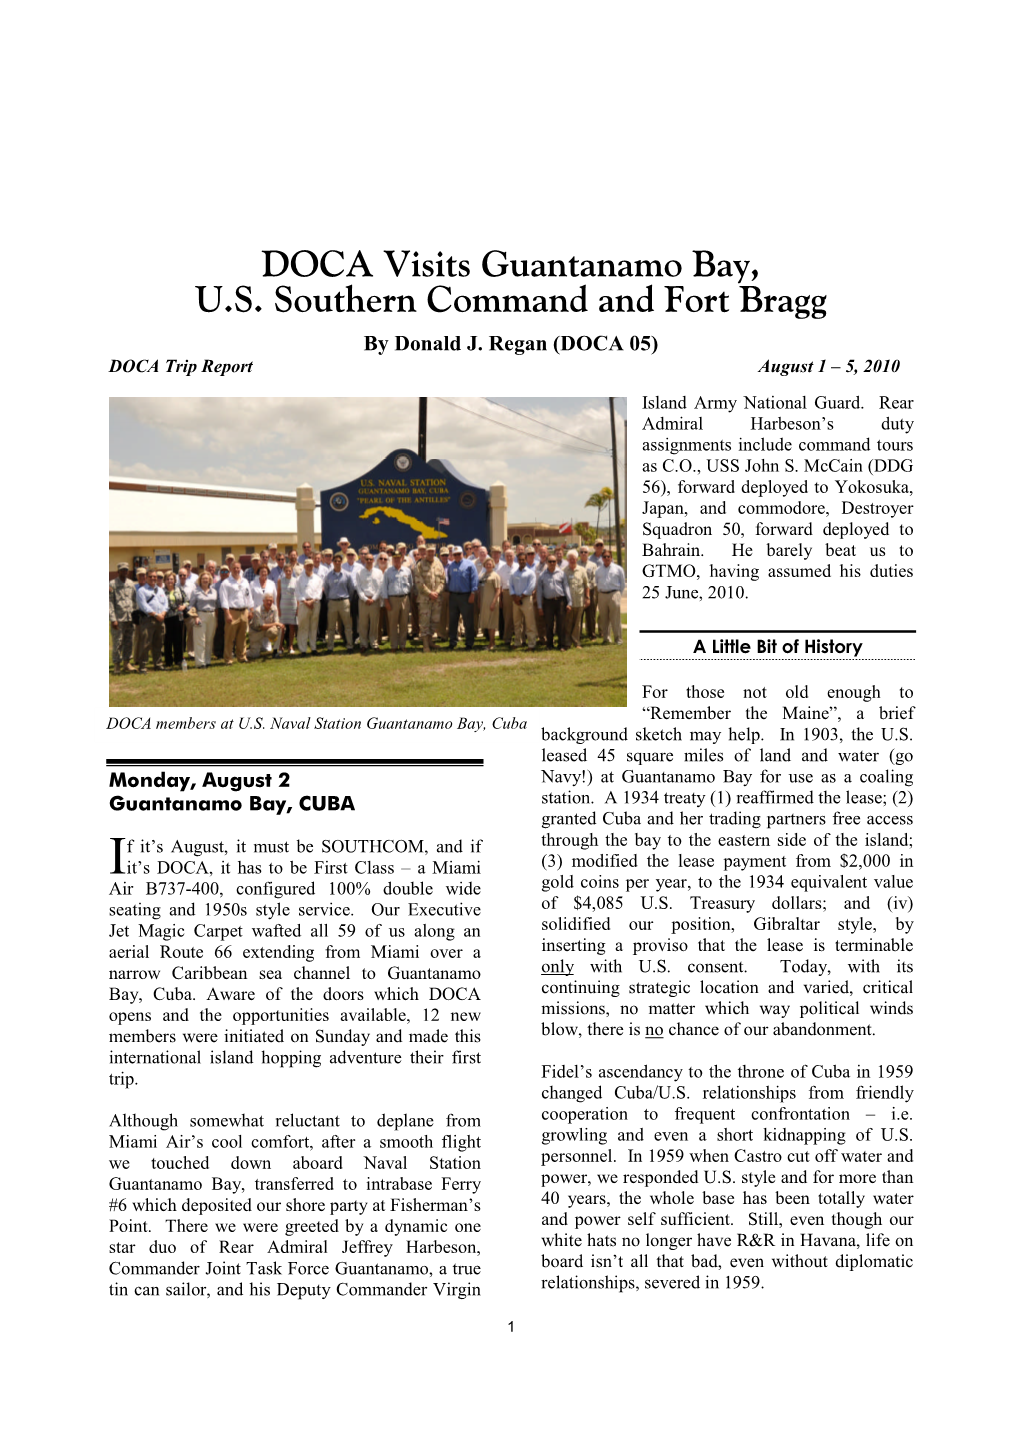 DOCA Visits Guantanamo Bay, U.S. Southern Command and Fort Bragg by Donald J